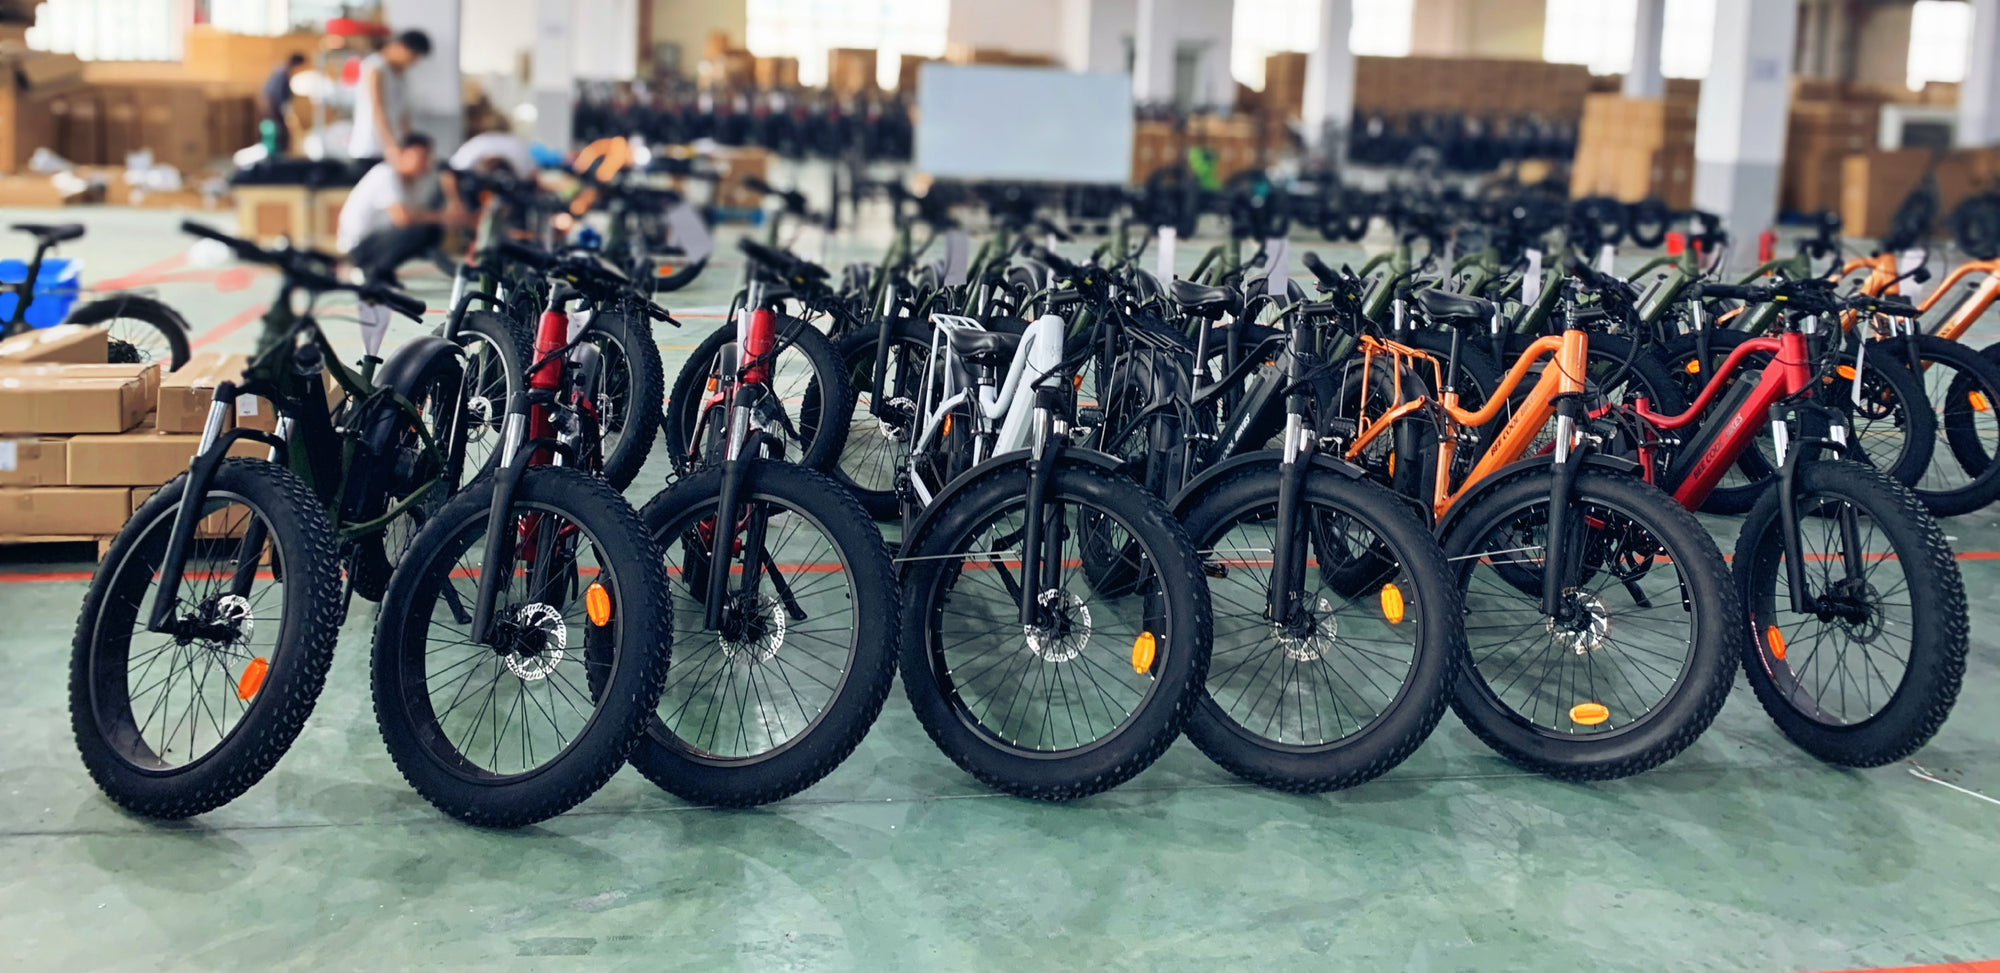 BeeCool Bikes: Soft-tail Long-rang Ebikes With Excellence in Manufacturing Craftsmanship